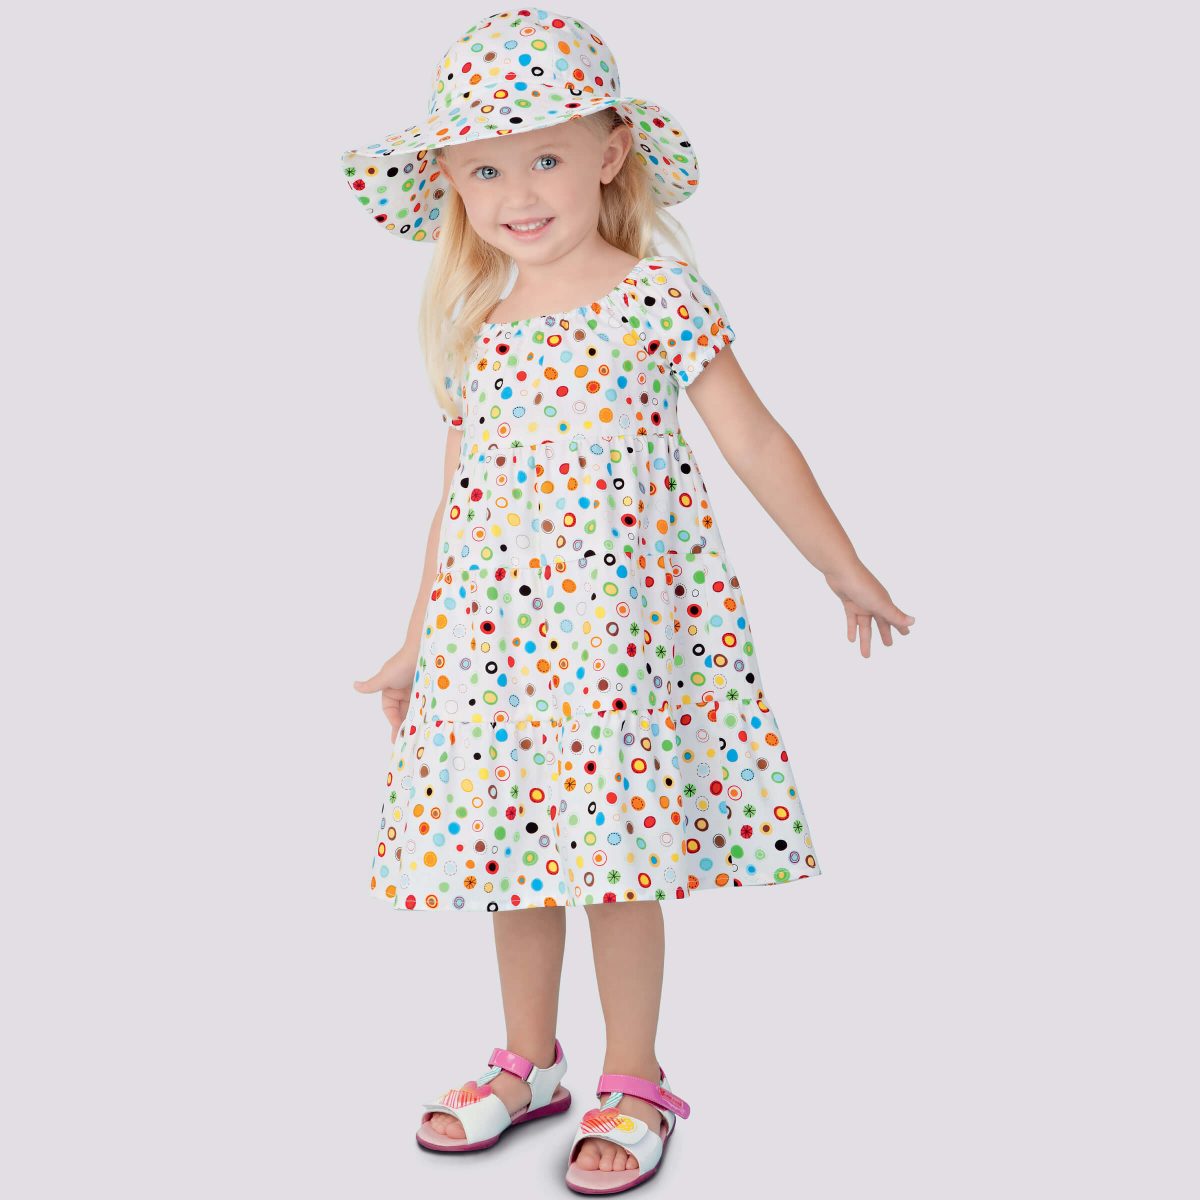 Simplicity Sewing Pattern S9126 Toddlers' Dresses